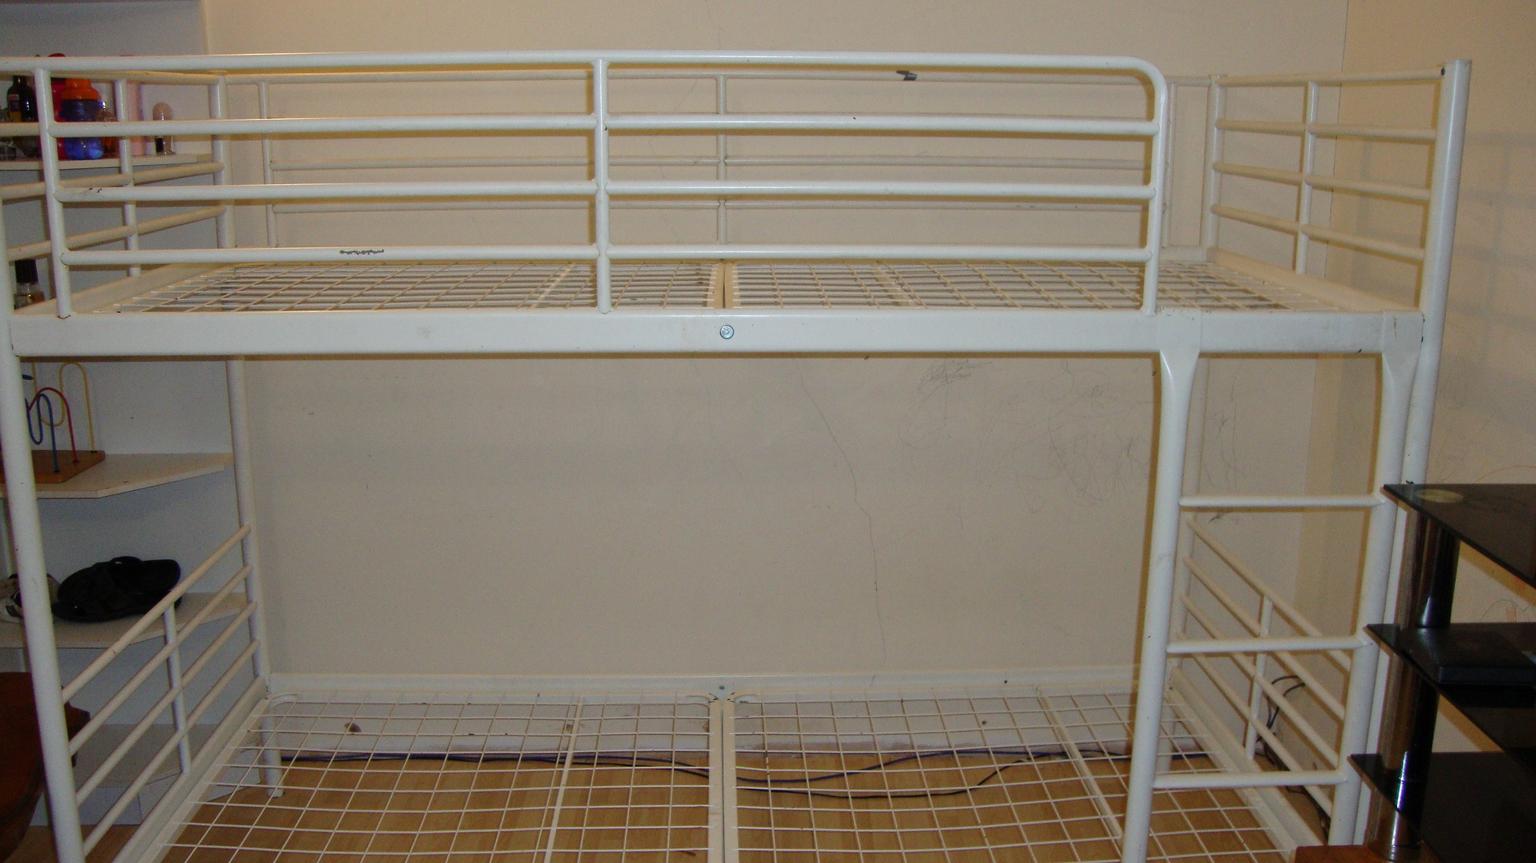 Ikea Tromso White Bunk Bed Frame With, Ikea Metal Frame Bunk Bed Instructions